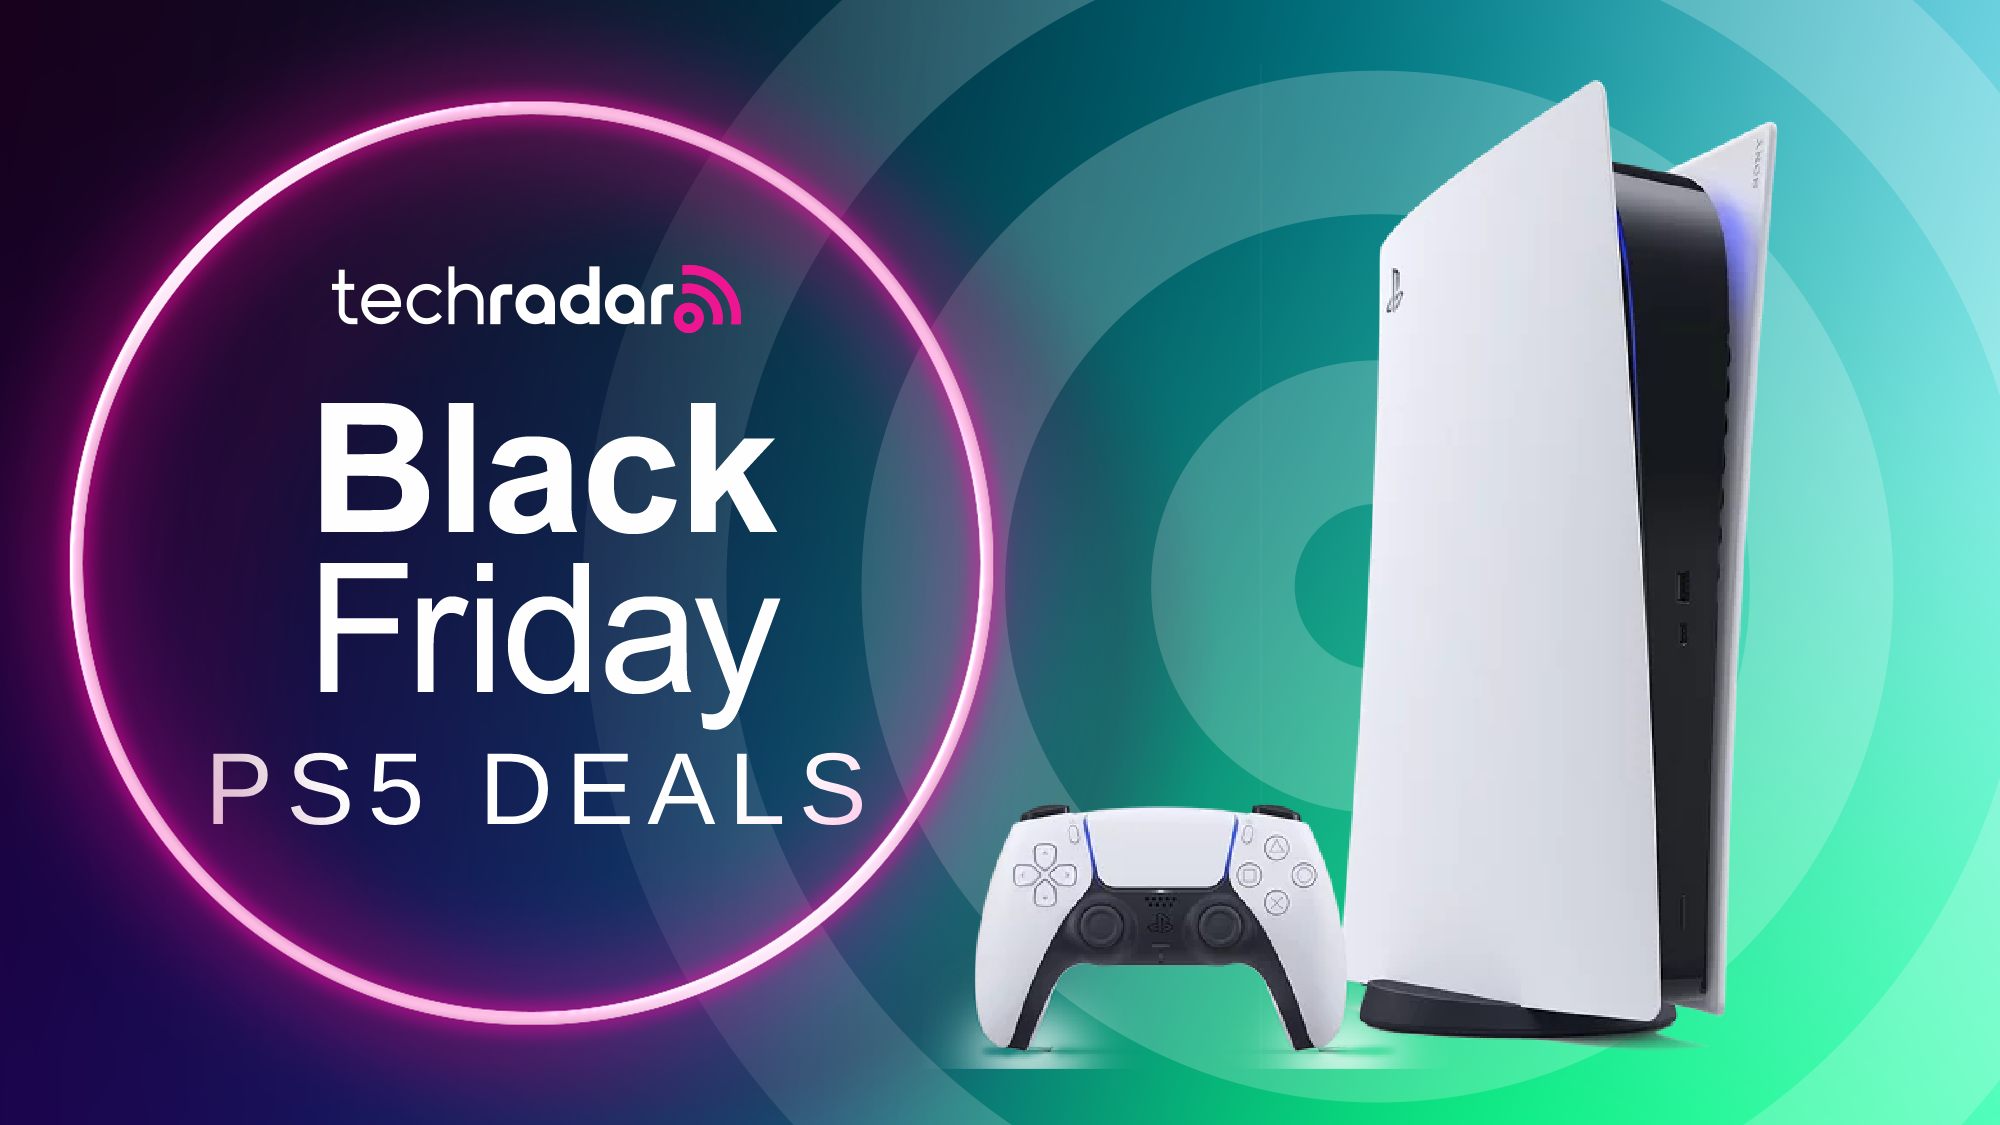 Black Friday 2022: PlayStation game and accessory deals are now